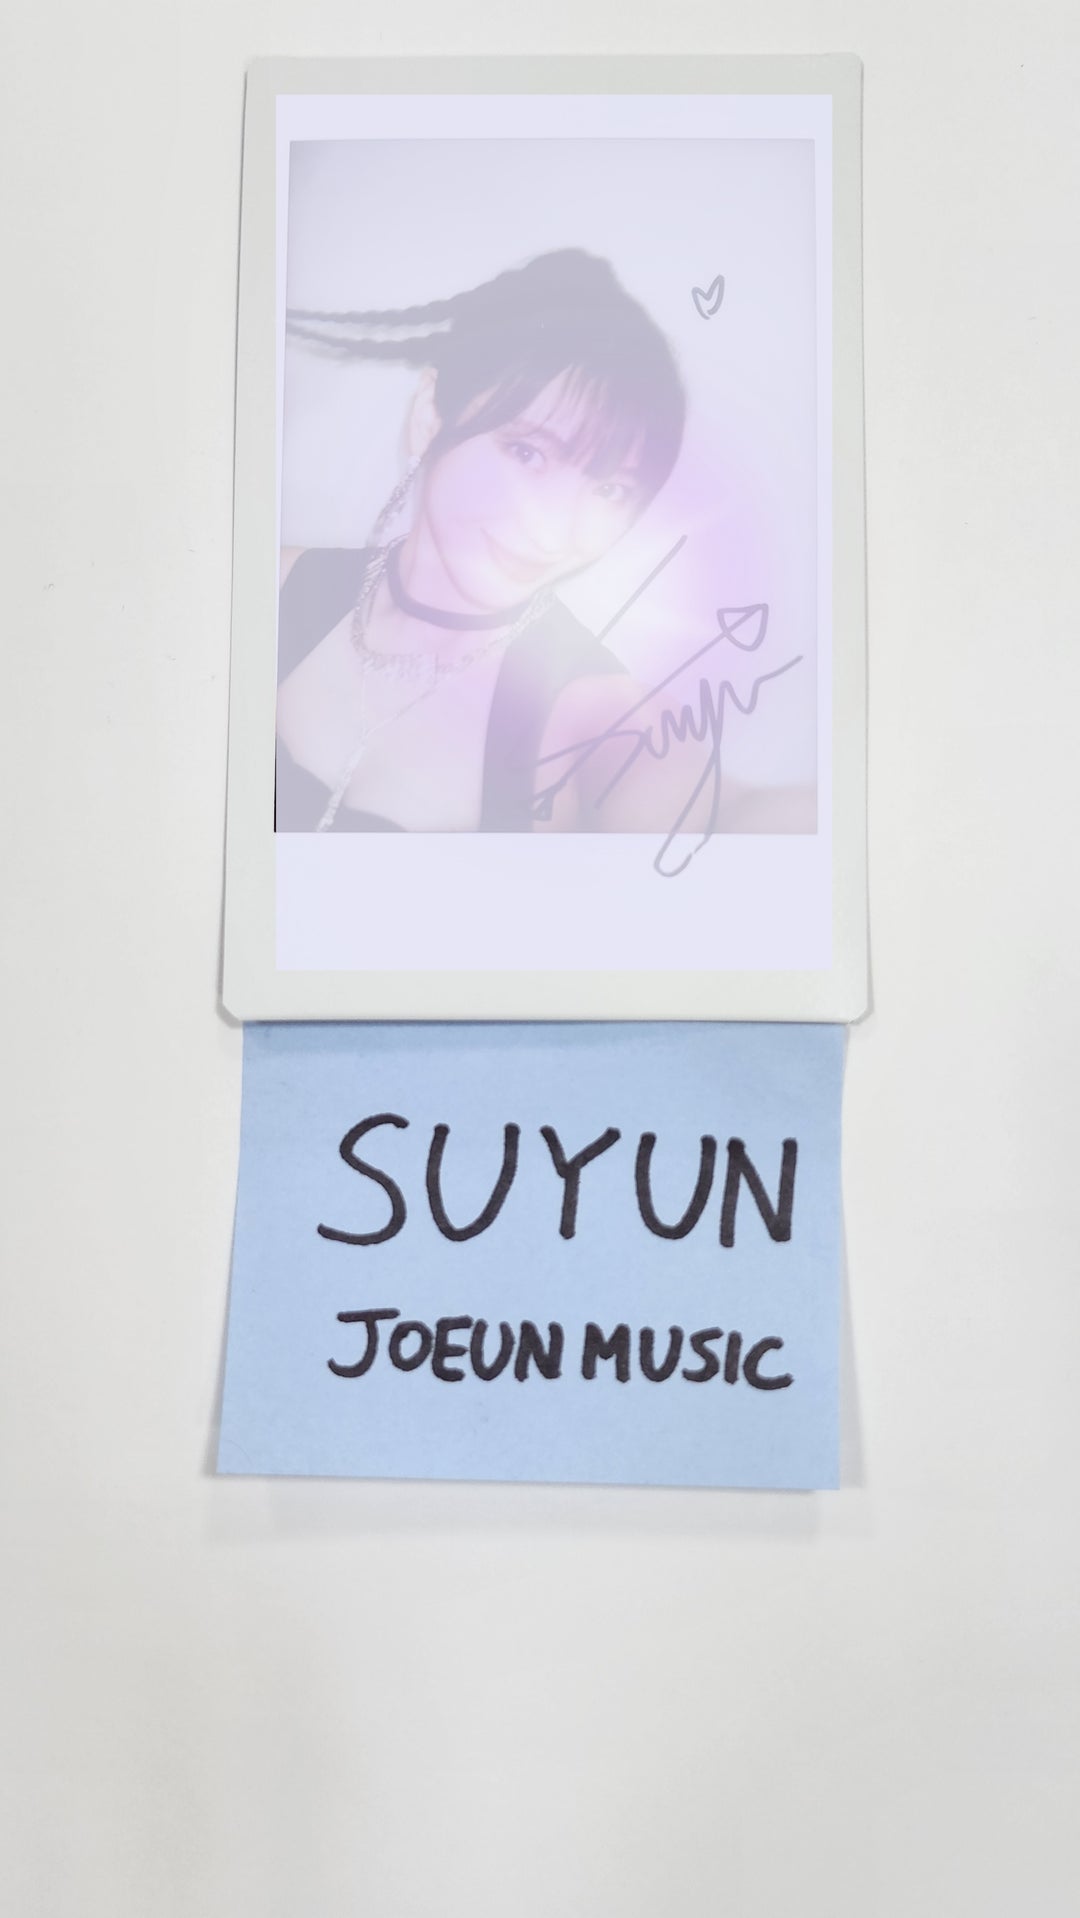 Suyun (Of Rocket Punch) 'FLASH ' - Hand Autographed(Signed) Polaroid